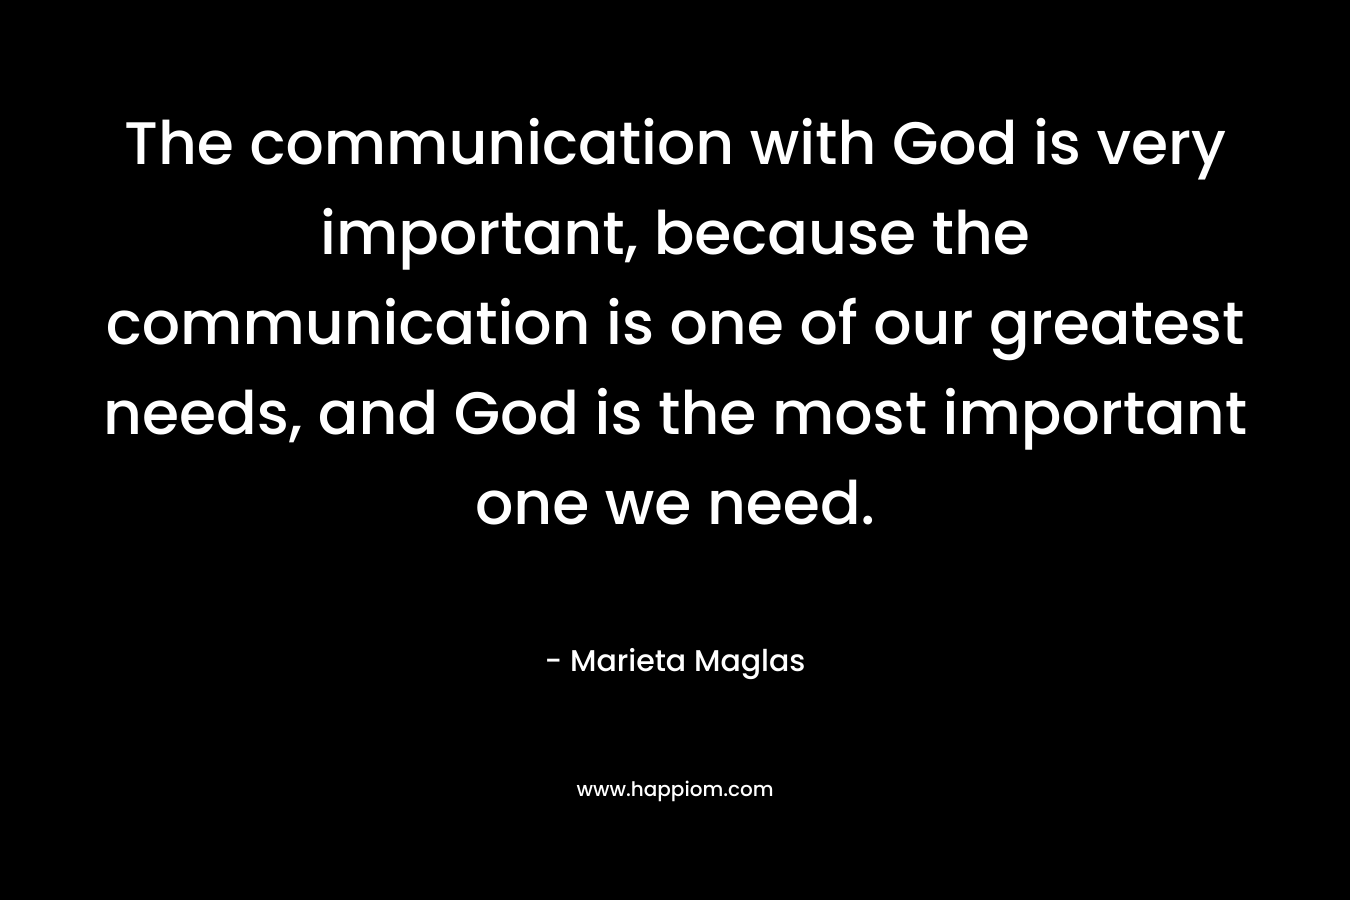 The communication with God is very important, because the communication is one of our greatest needs, and God is the most important one we need.